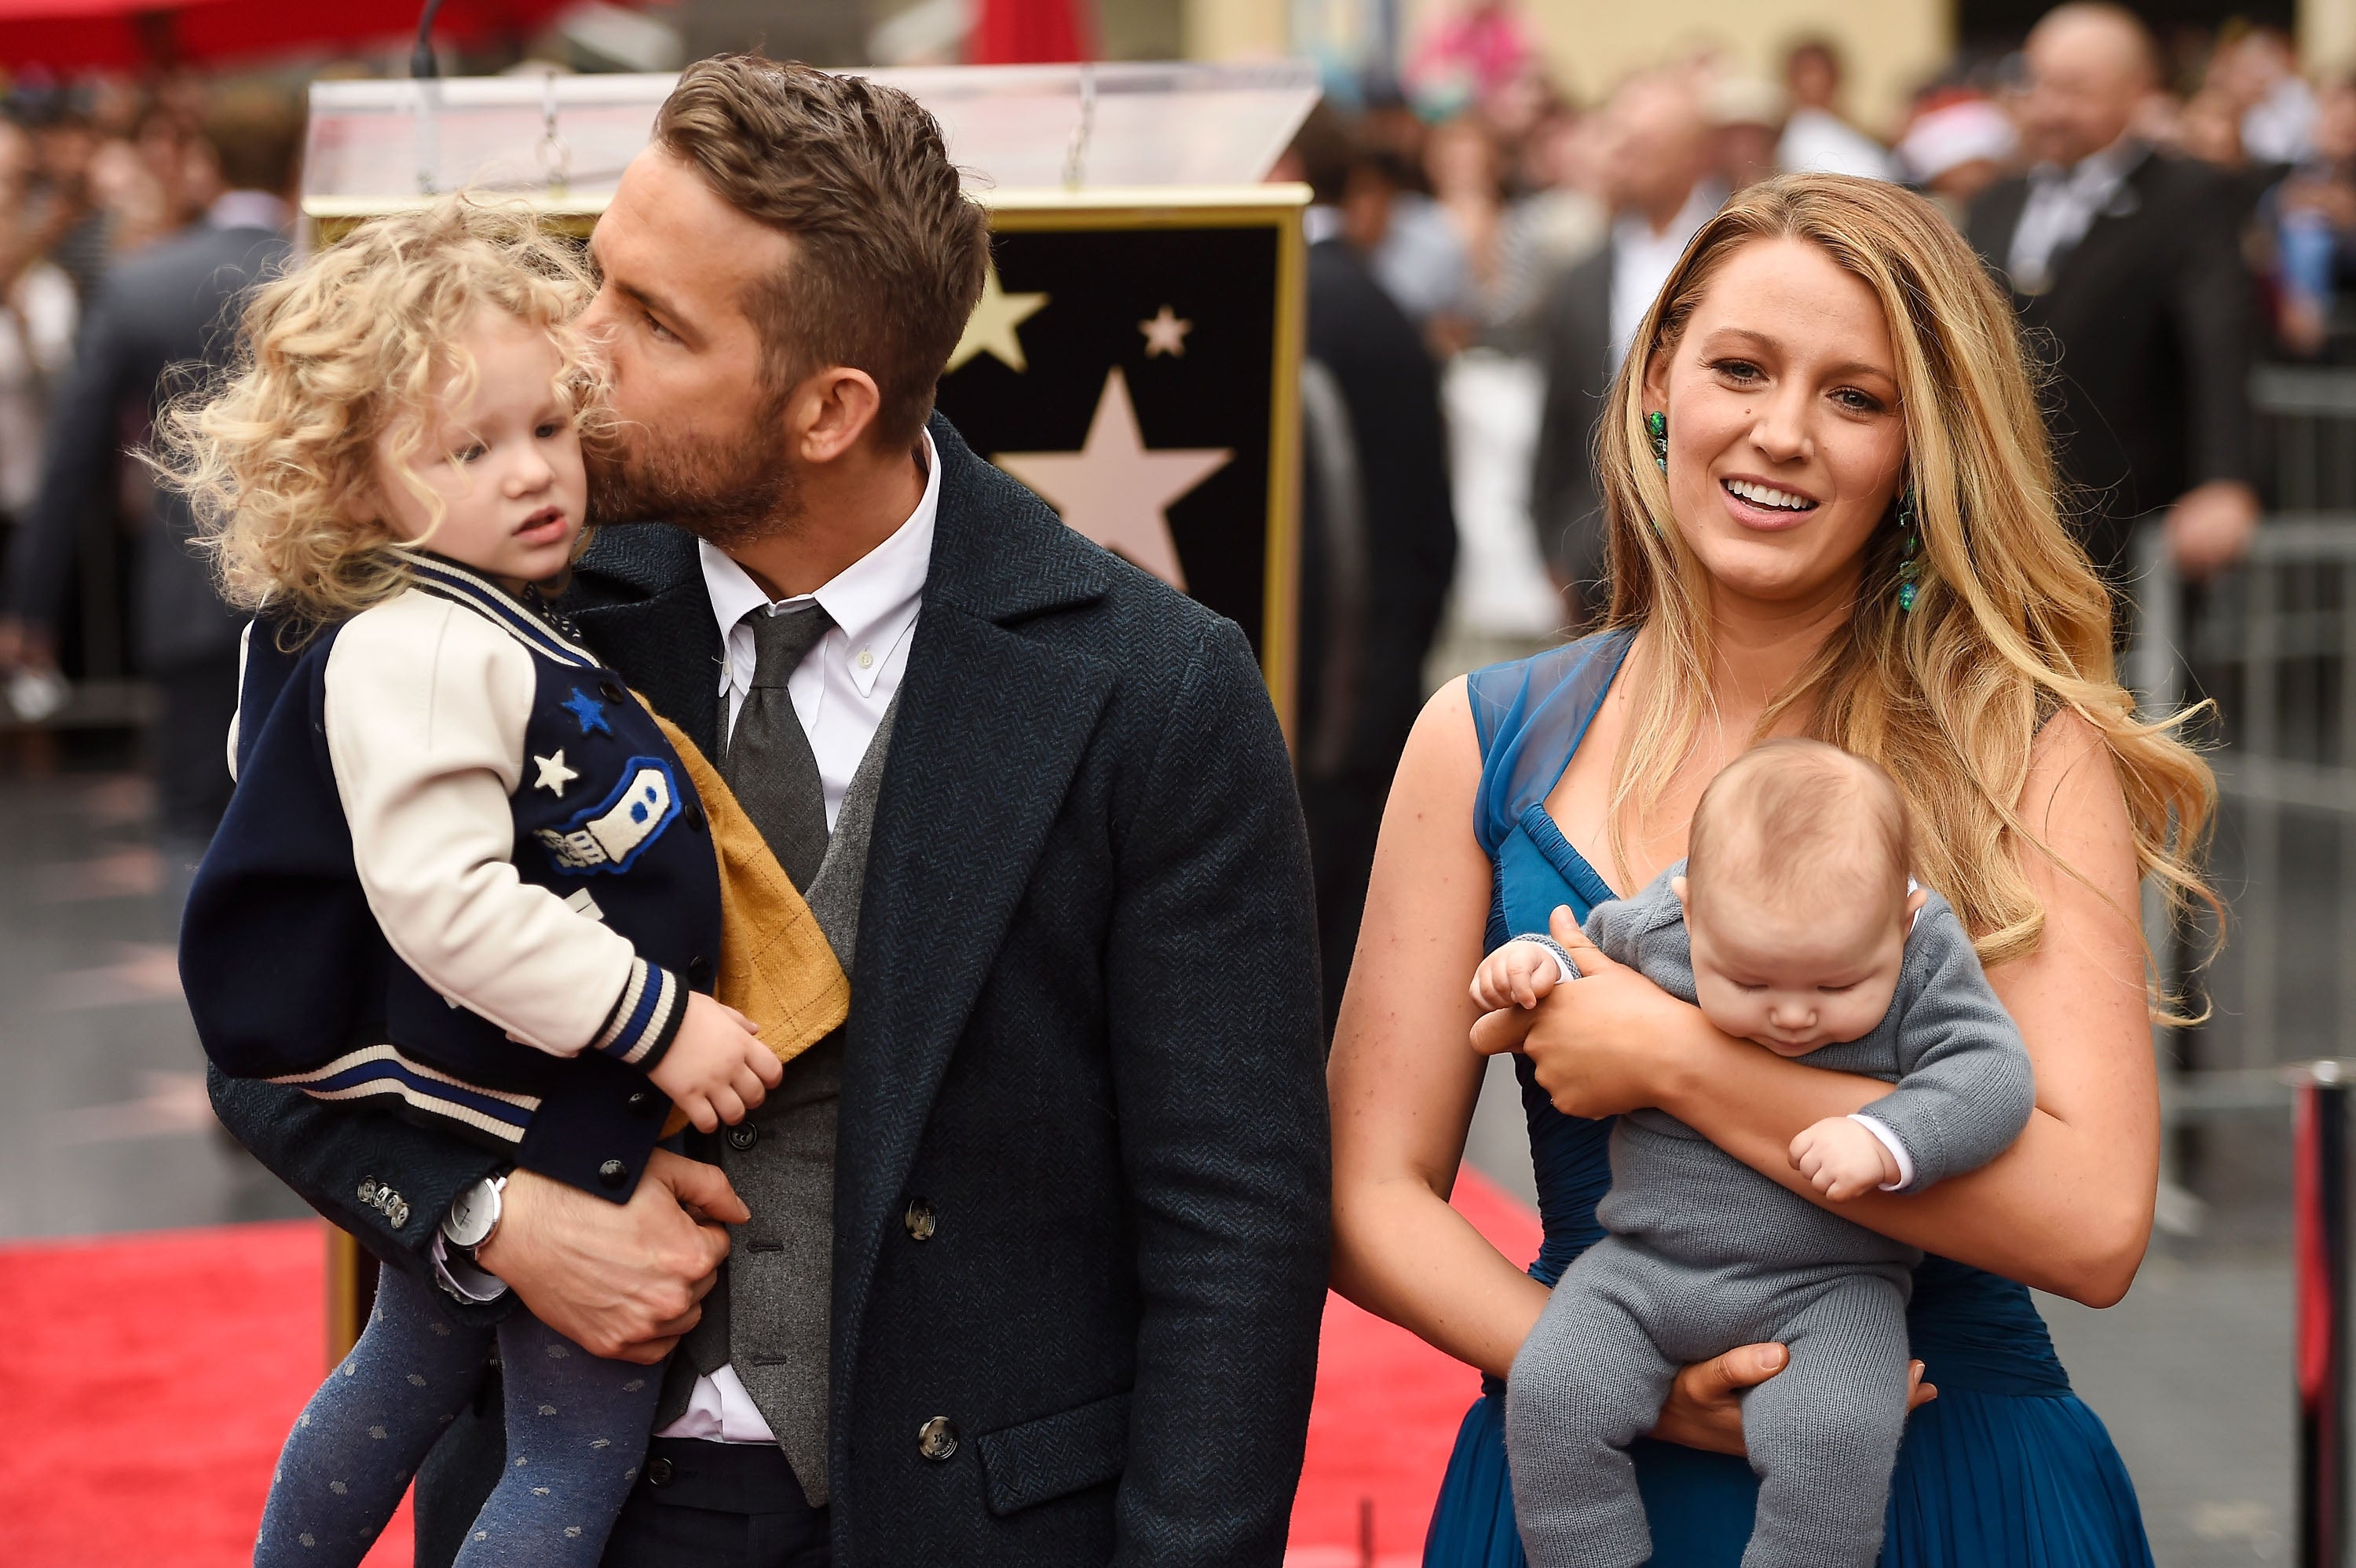 Ryan Reynolds and Blake Lively pose with their daughters during the Hollywood Walk of Fame ceremony in December 2016.